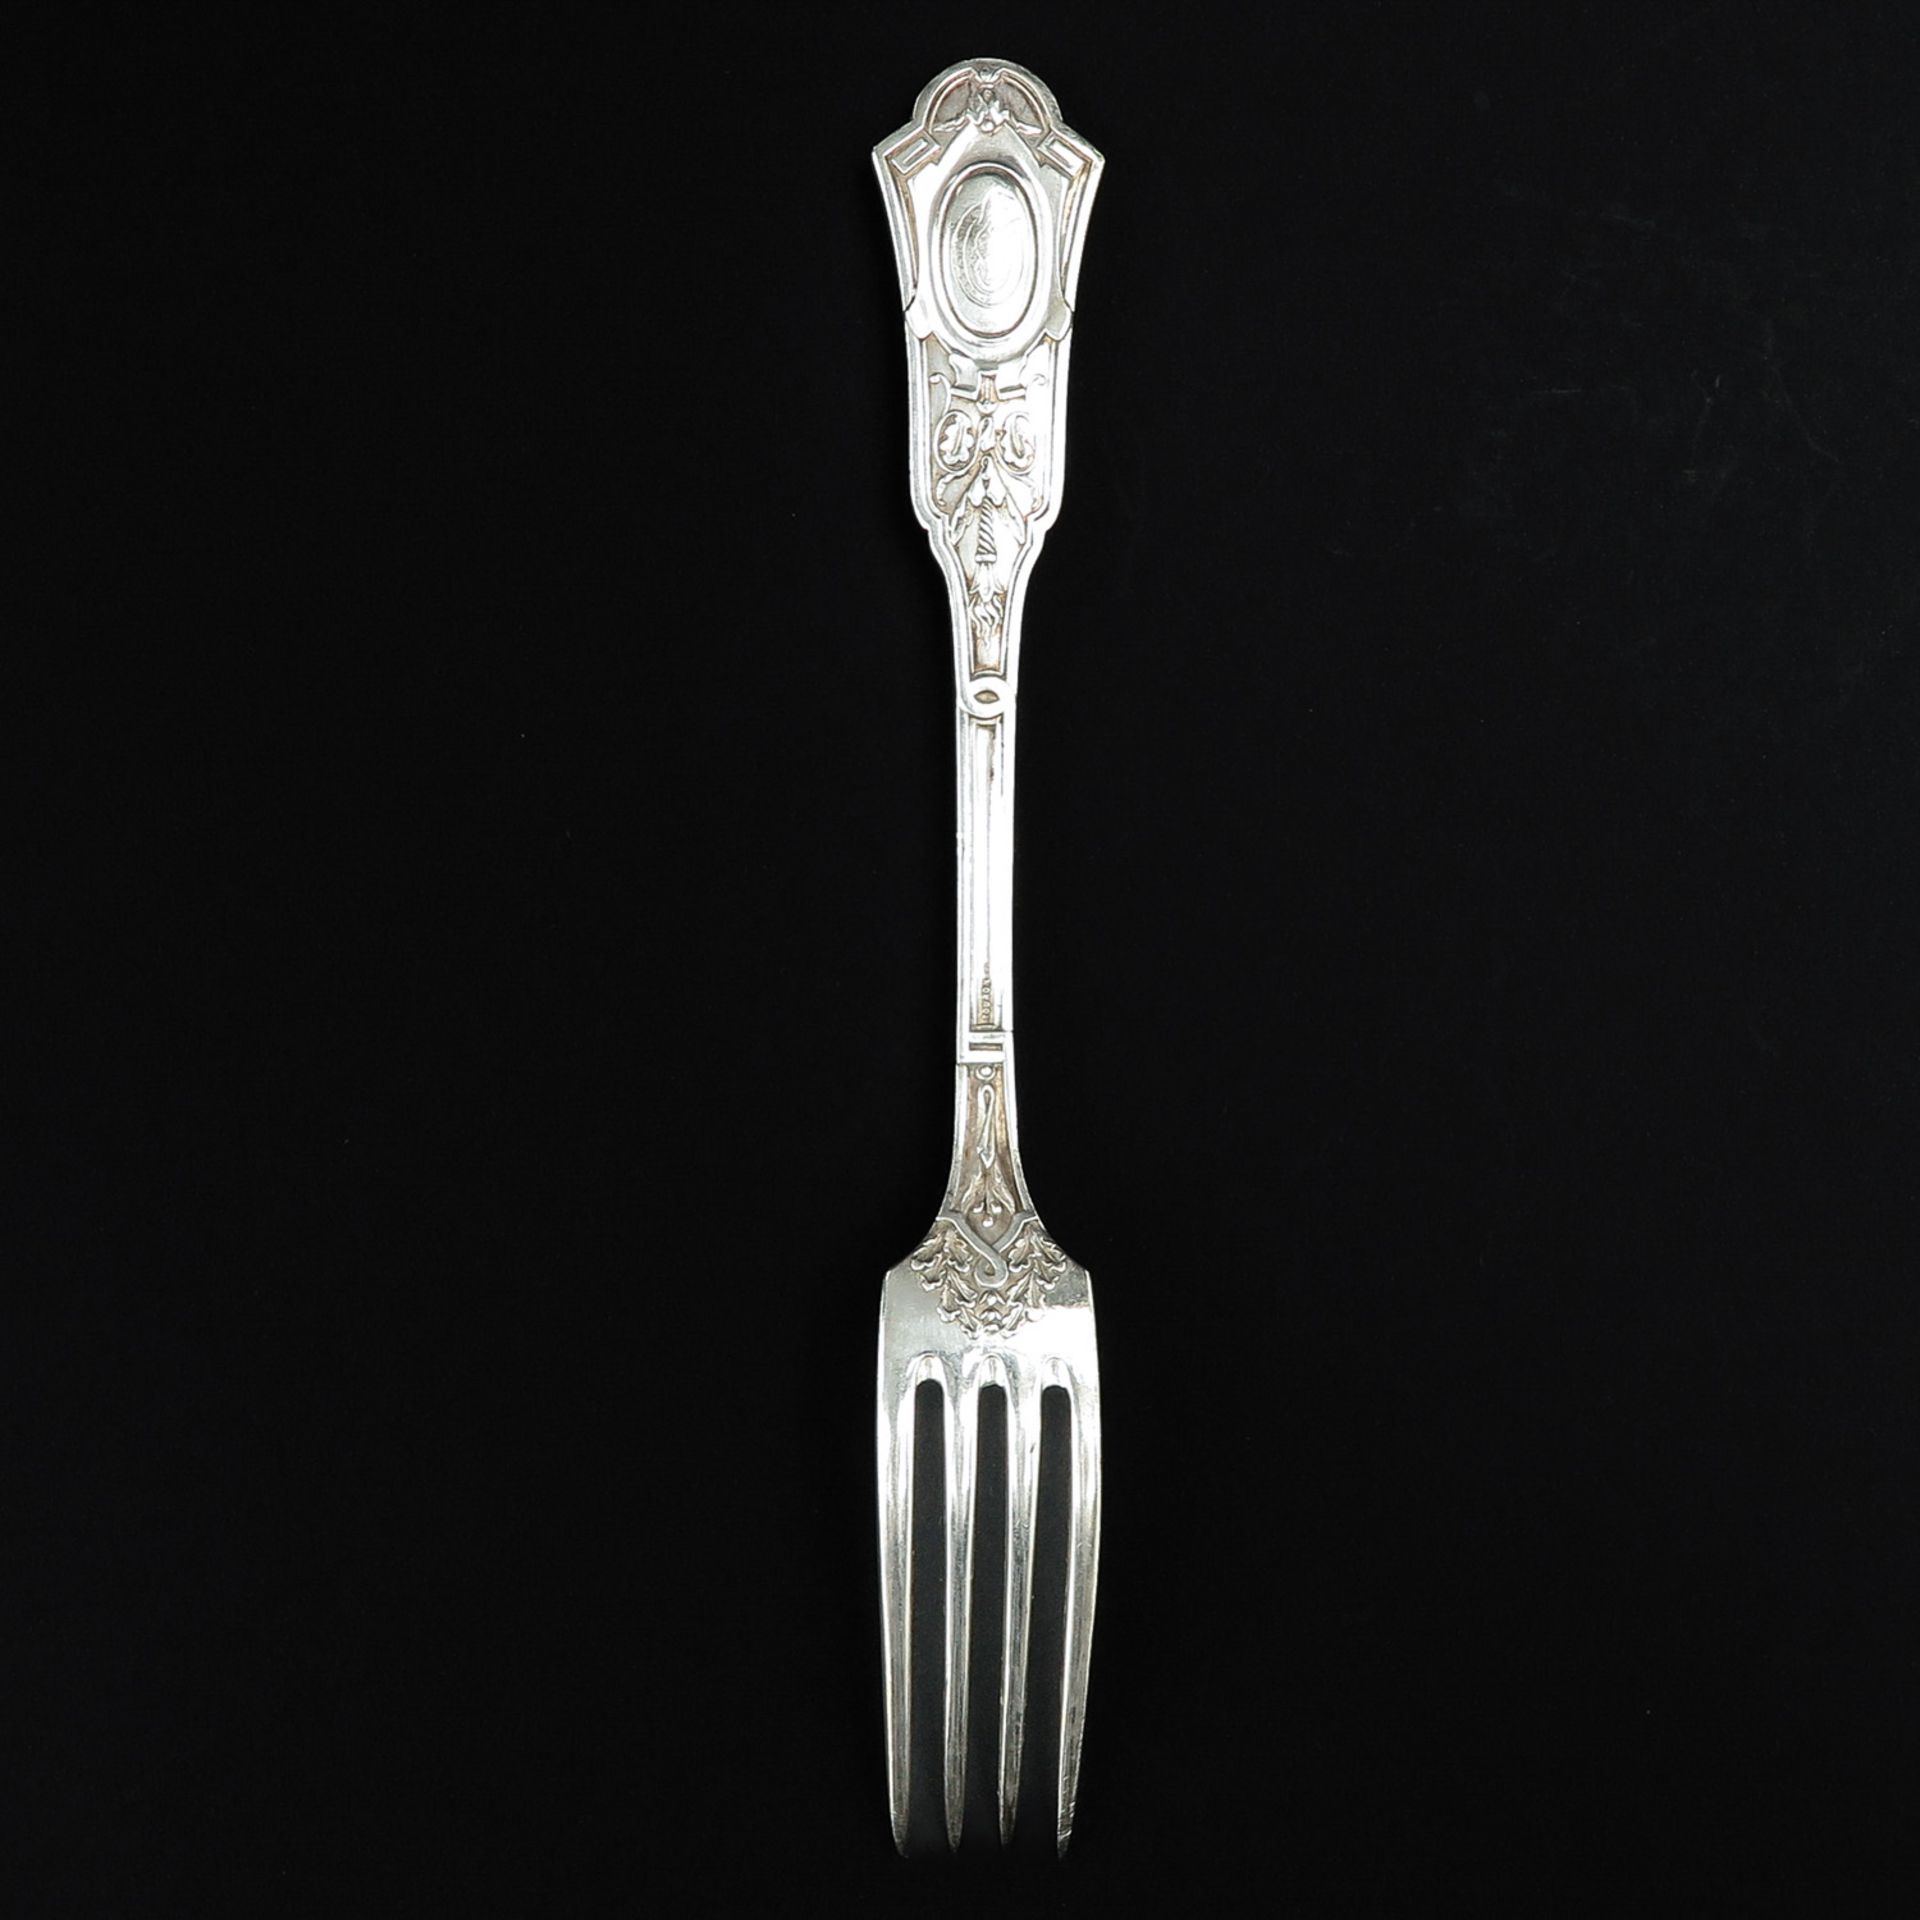 A Silver 6 Piece Place Cutlery Set - Image 4 of 8